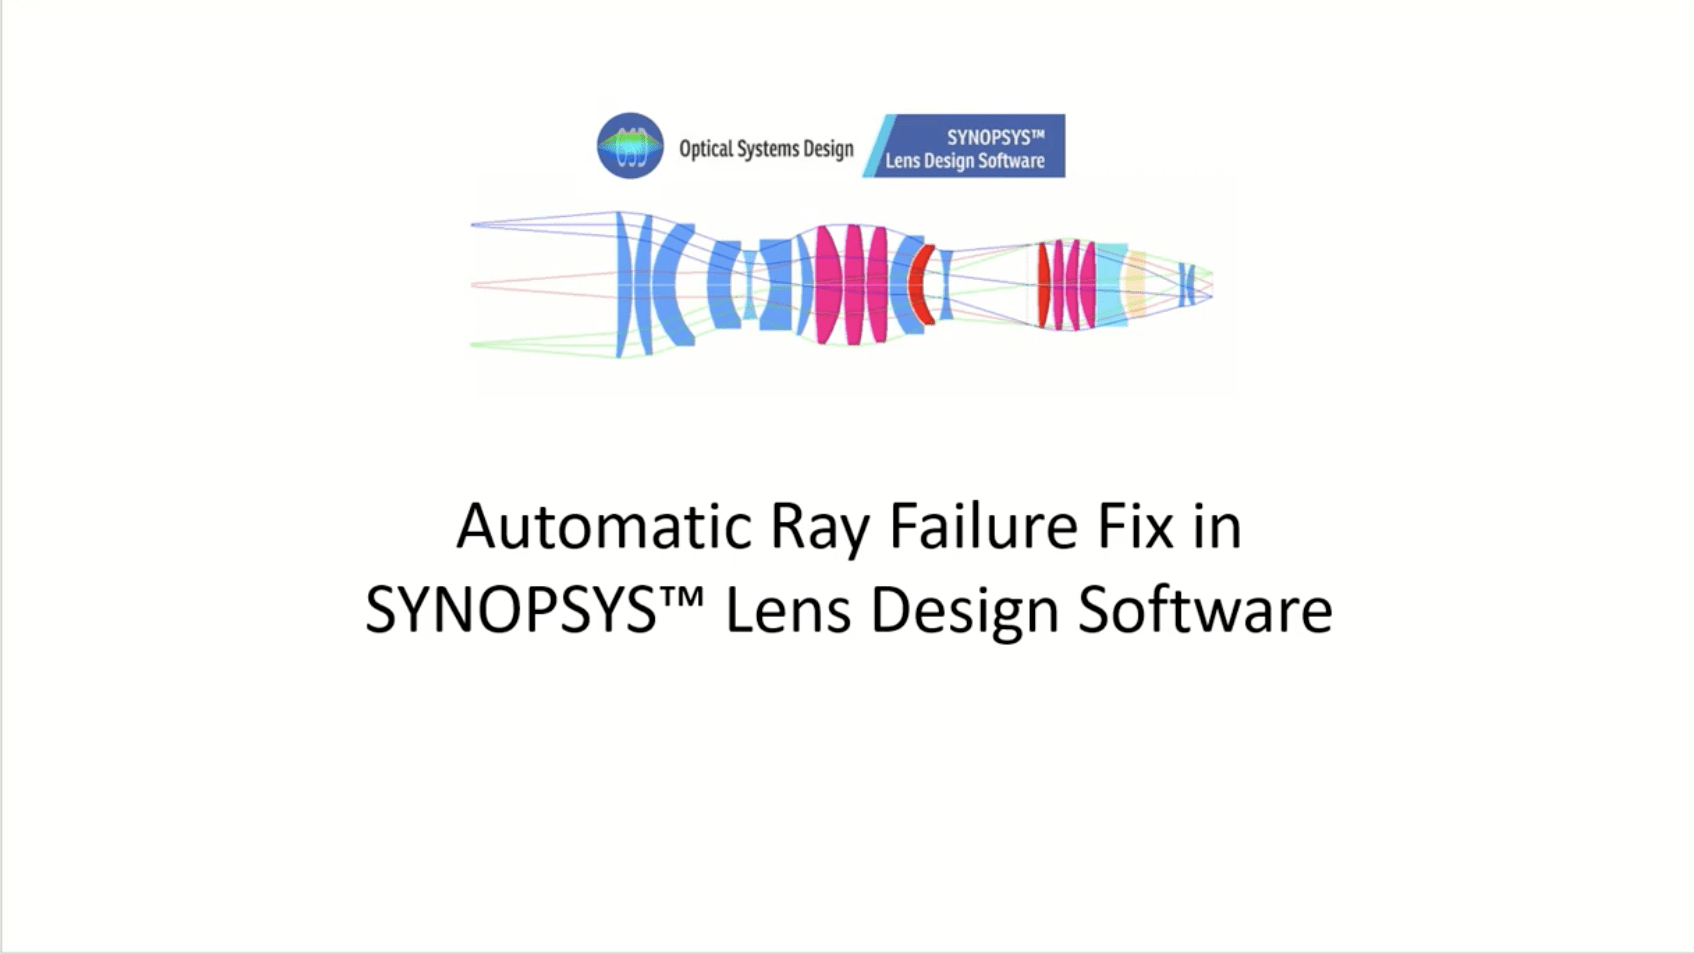 Ray Failure Fix: Fixed a Failing Design into Fully Functioning with One Click